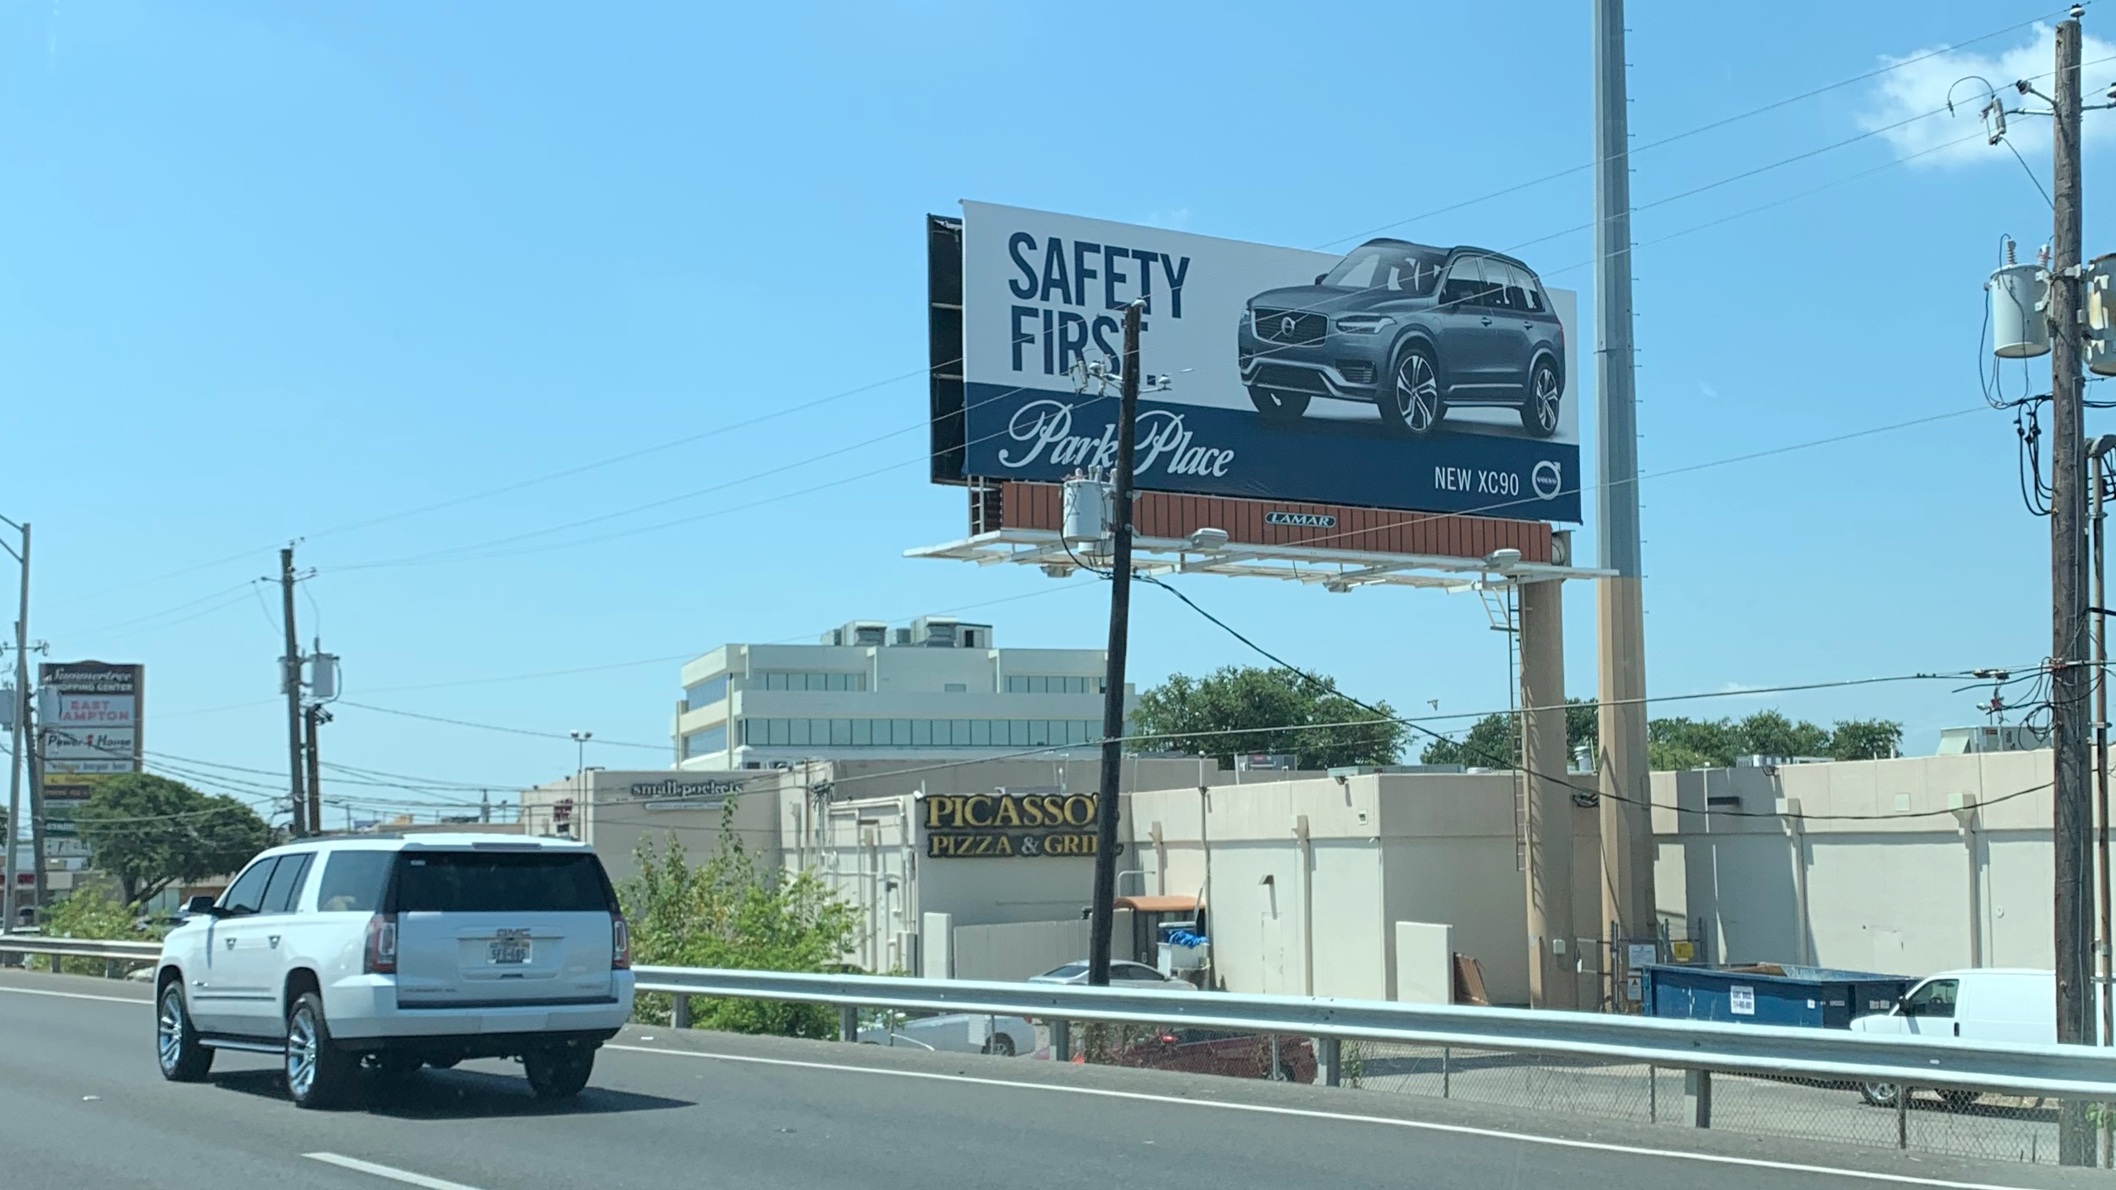 safety first park place billboard.png